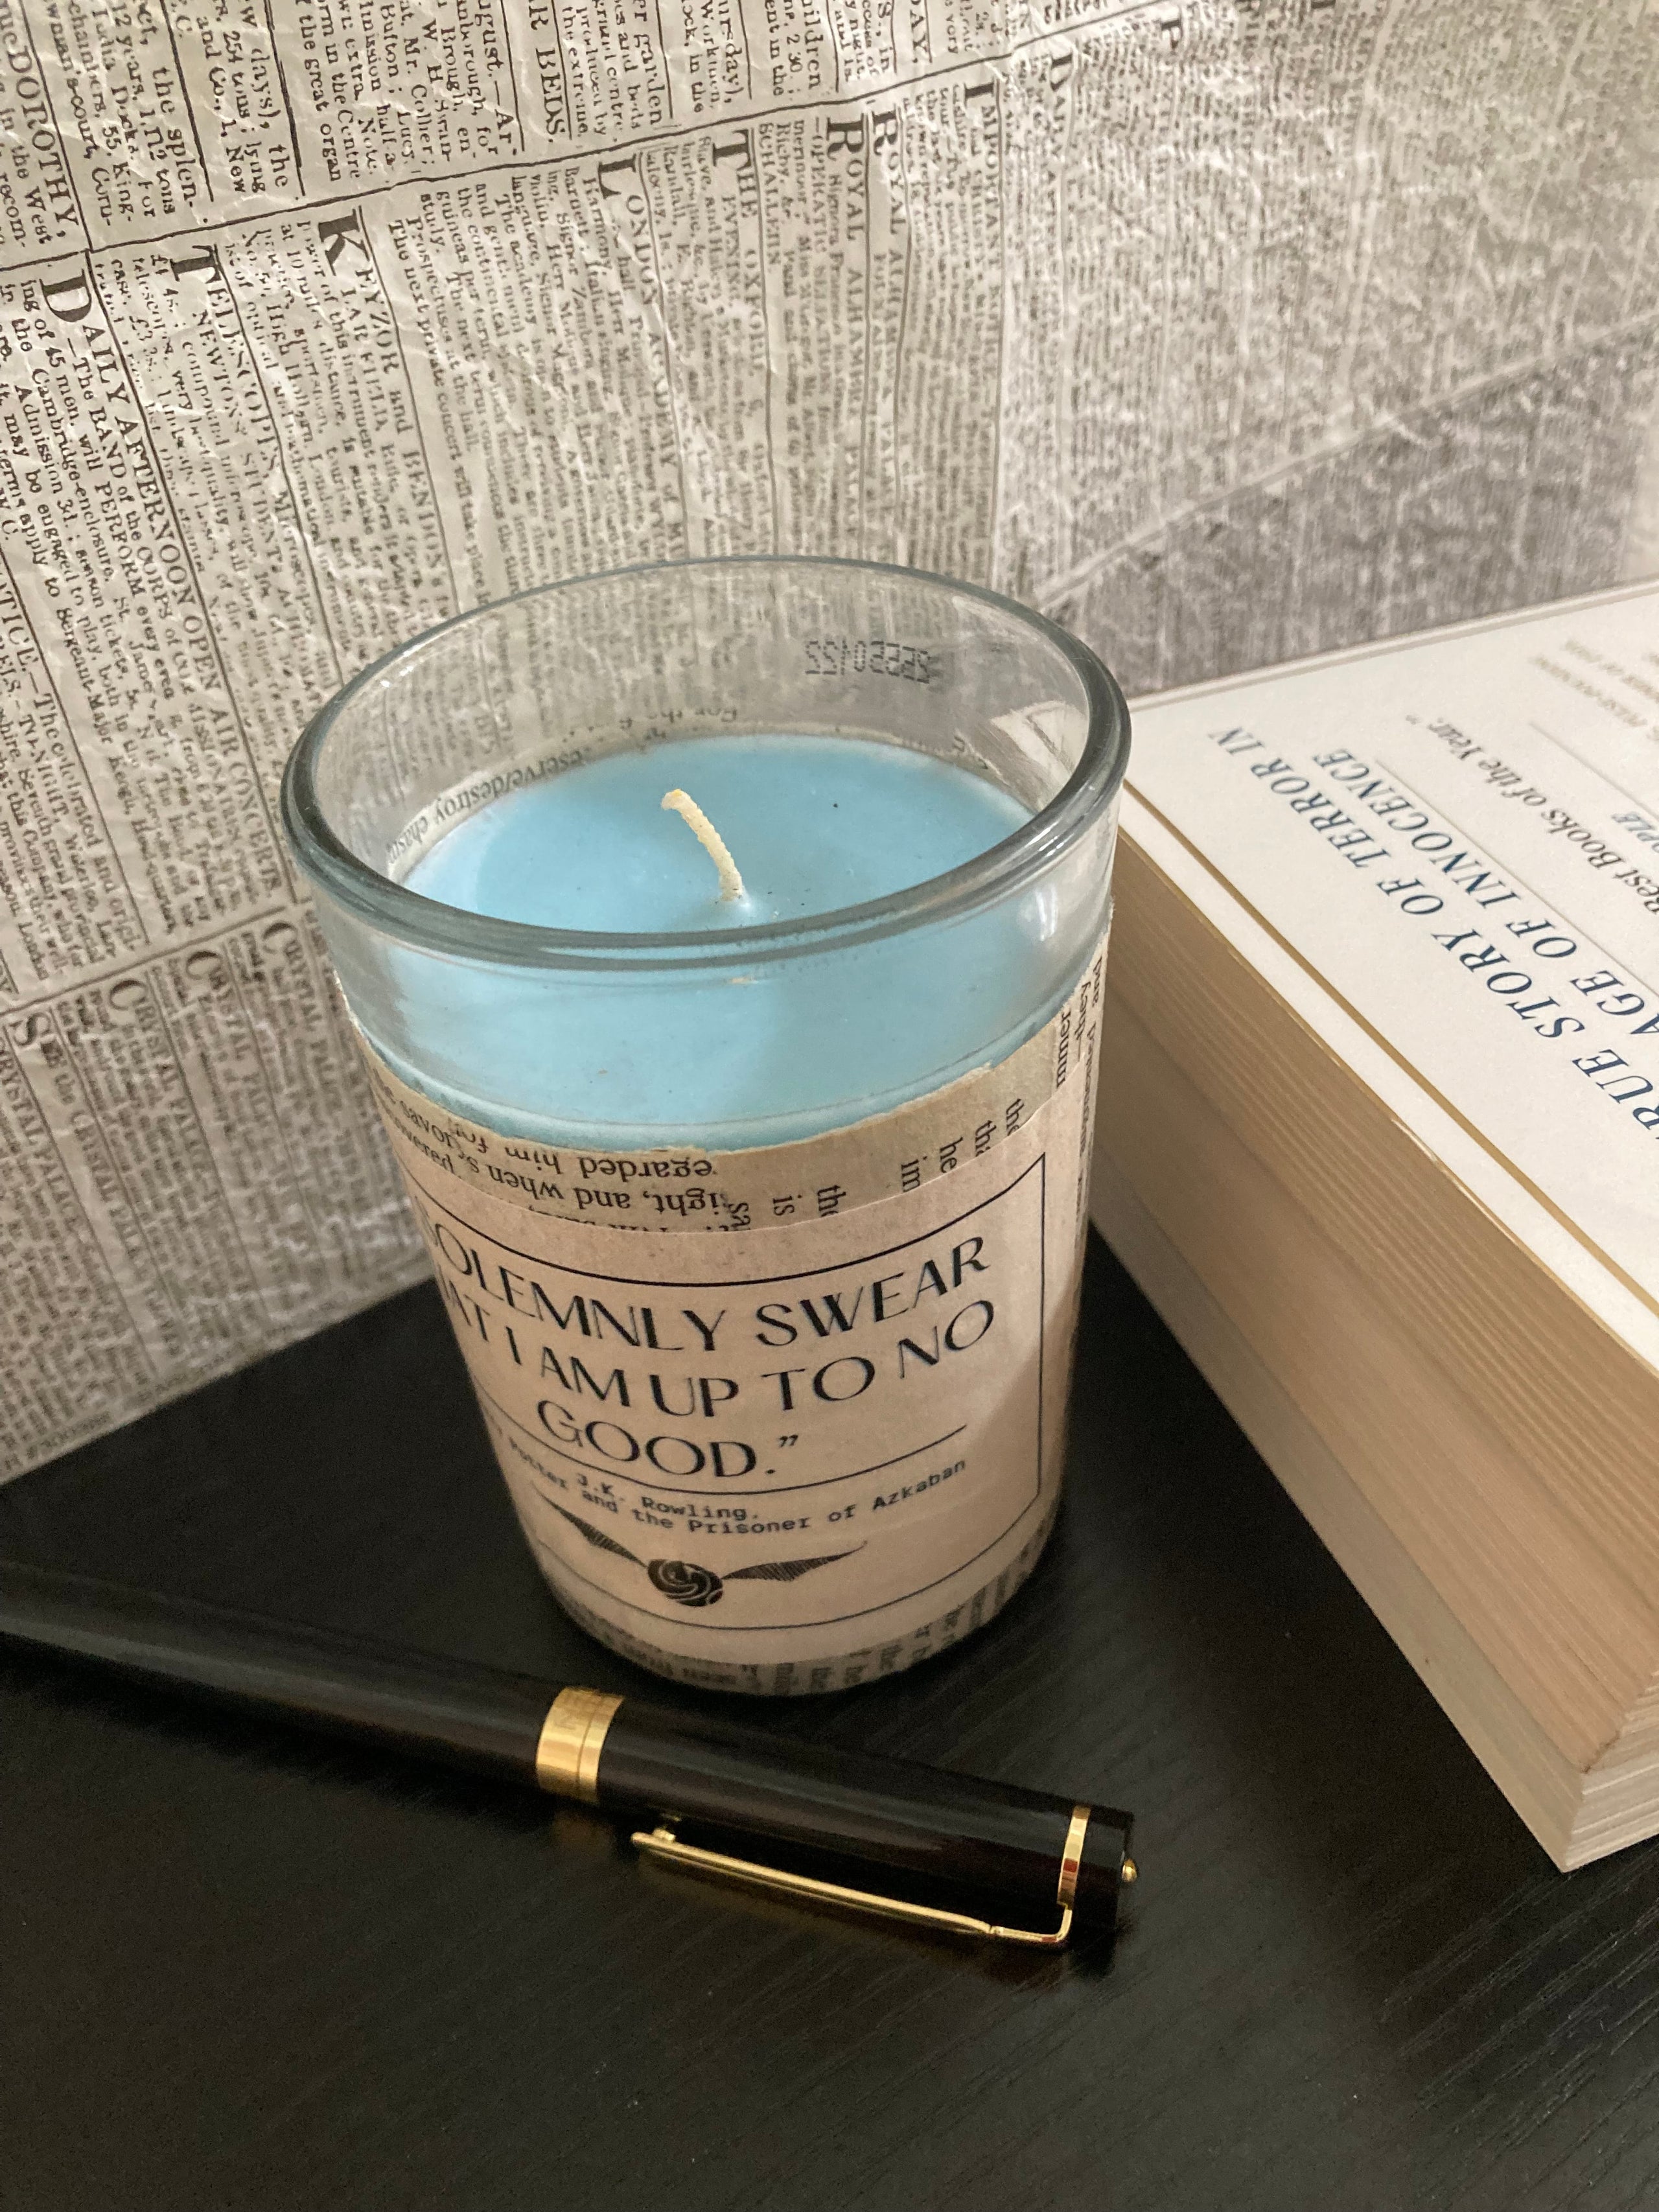 Book Worm, Book Lover Gift, Bookish Candle